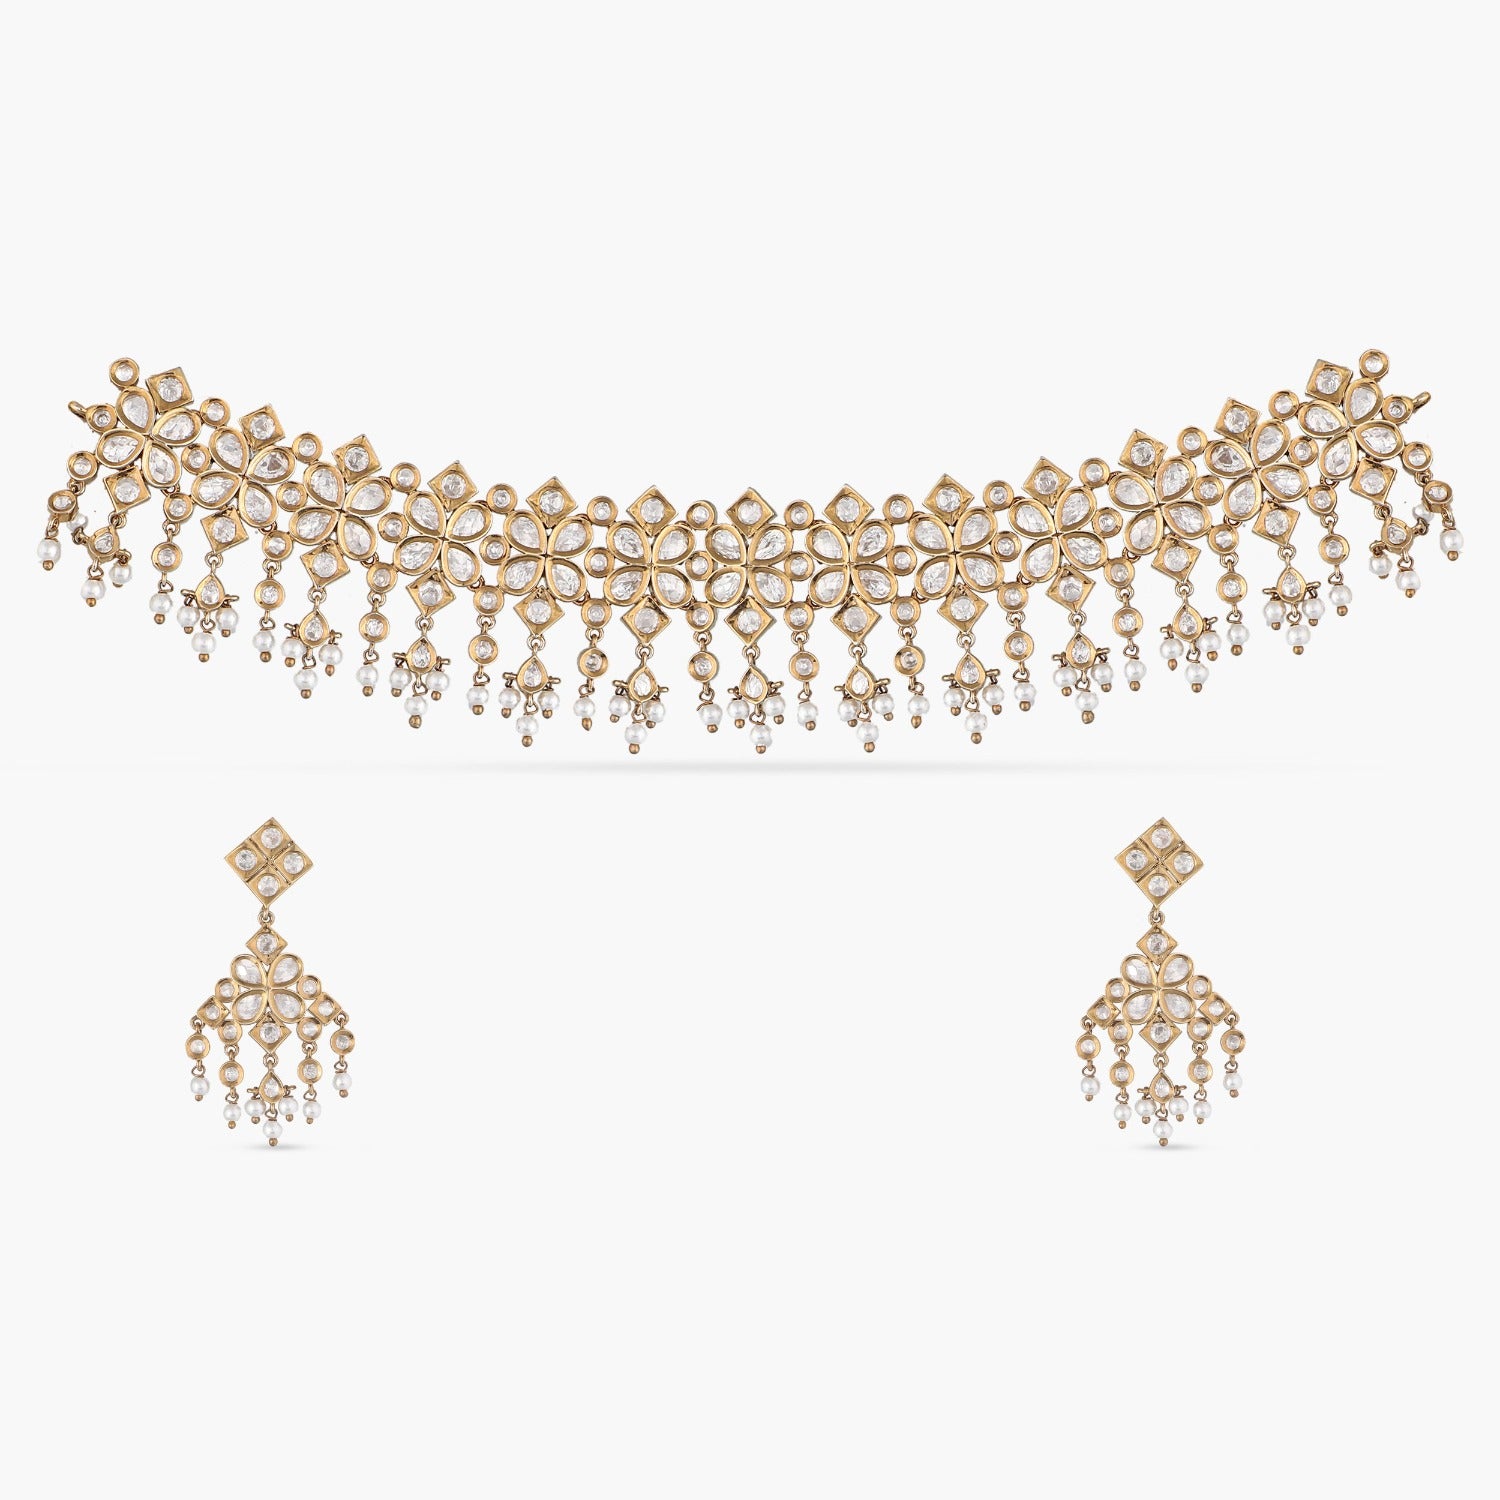 A picture of an Indian artificial jewelry set with a gold-toned choker necklace and matching earrings with Cubic Zirconia stones.